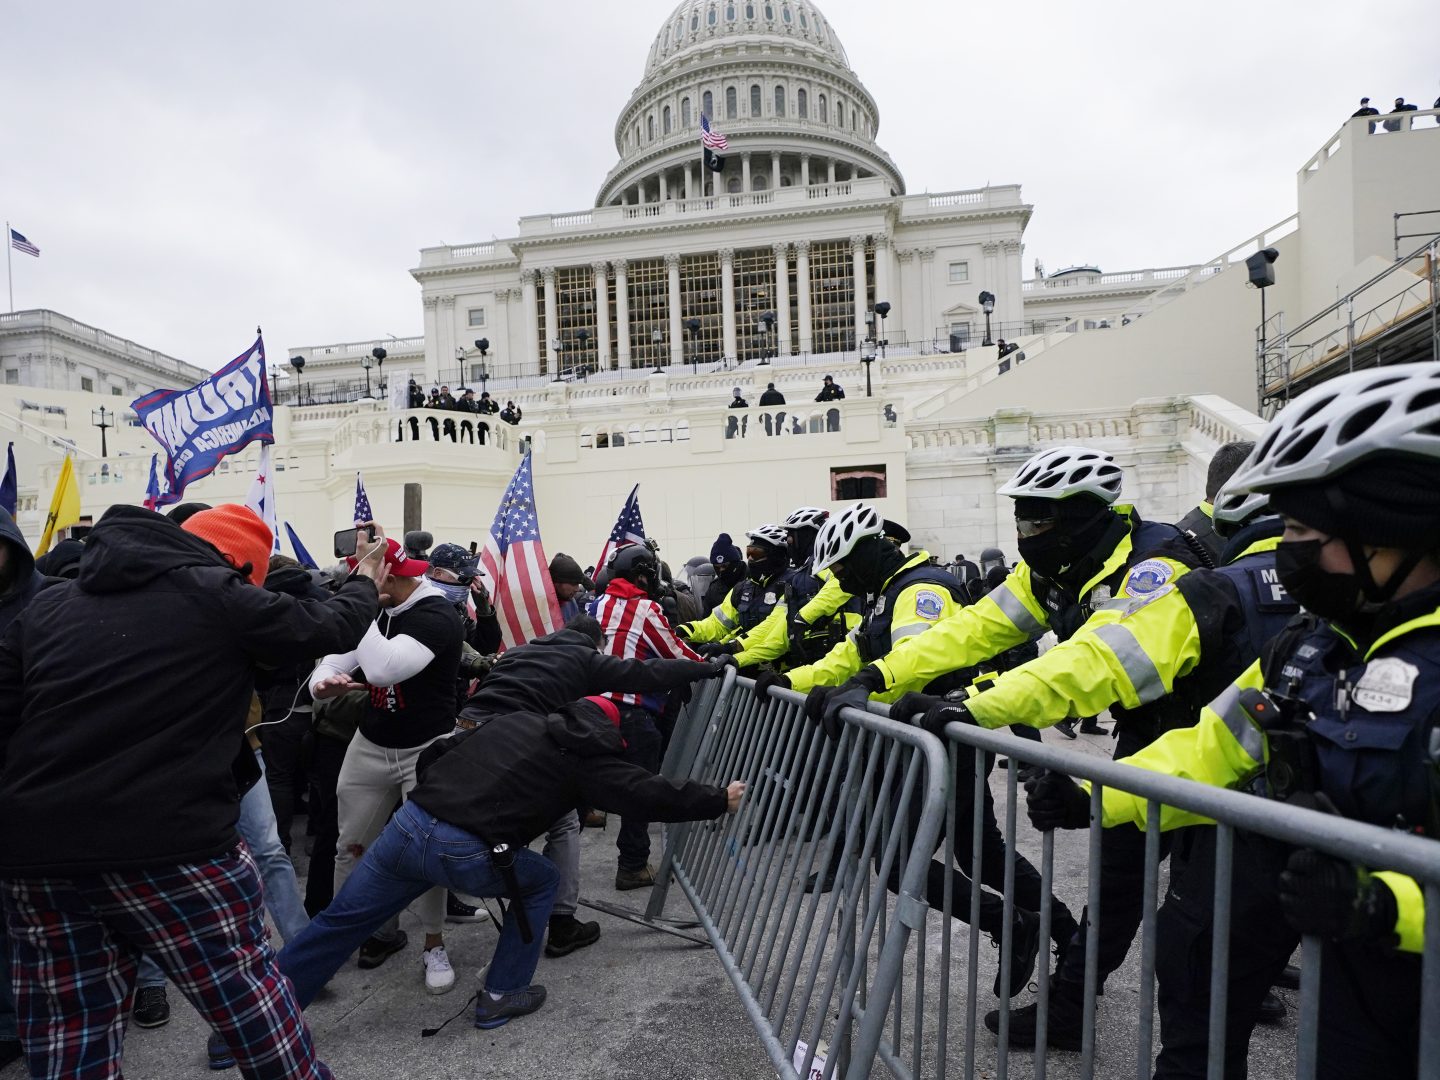 FILE - Trump supporters try to break through a police barrier at the Capitol in Washington on Jan. 6, 2021. An Alabama man who parked a pickup truck filled with weapons and Molotov cocktail components near the U.S. Capitol on the day of last year's riot was sentenced Friday, April 1, 2022, to nearly four years in prison. (AP Photo/Julio Cortez, File)